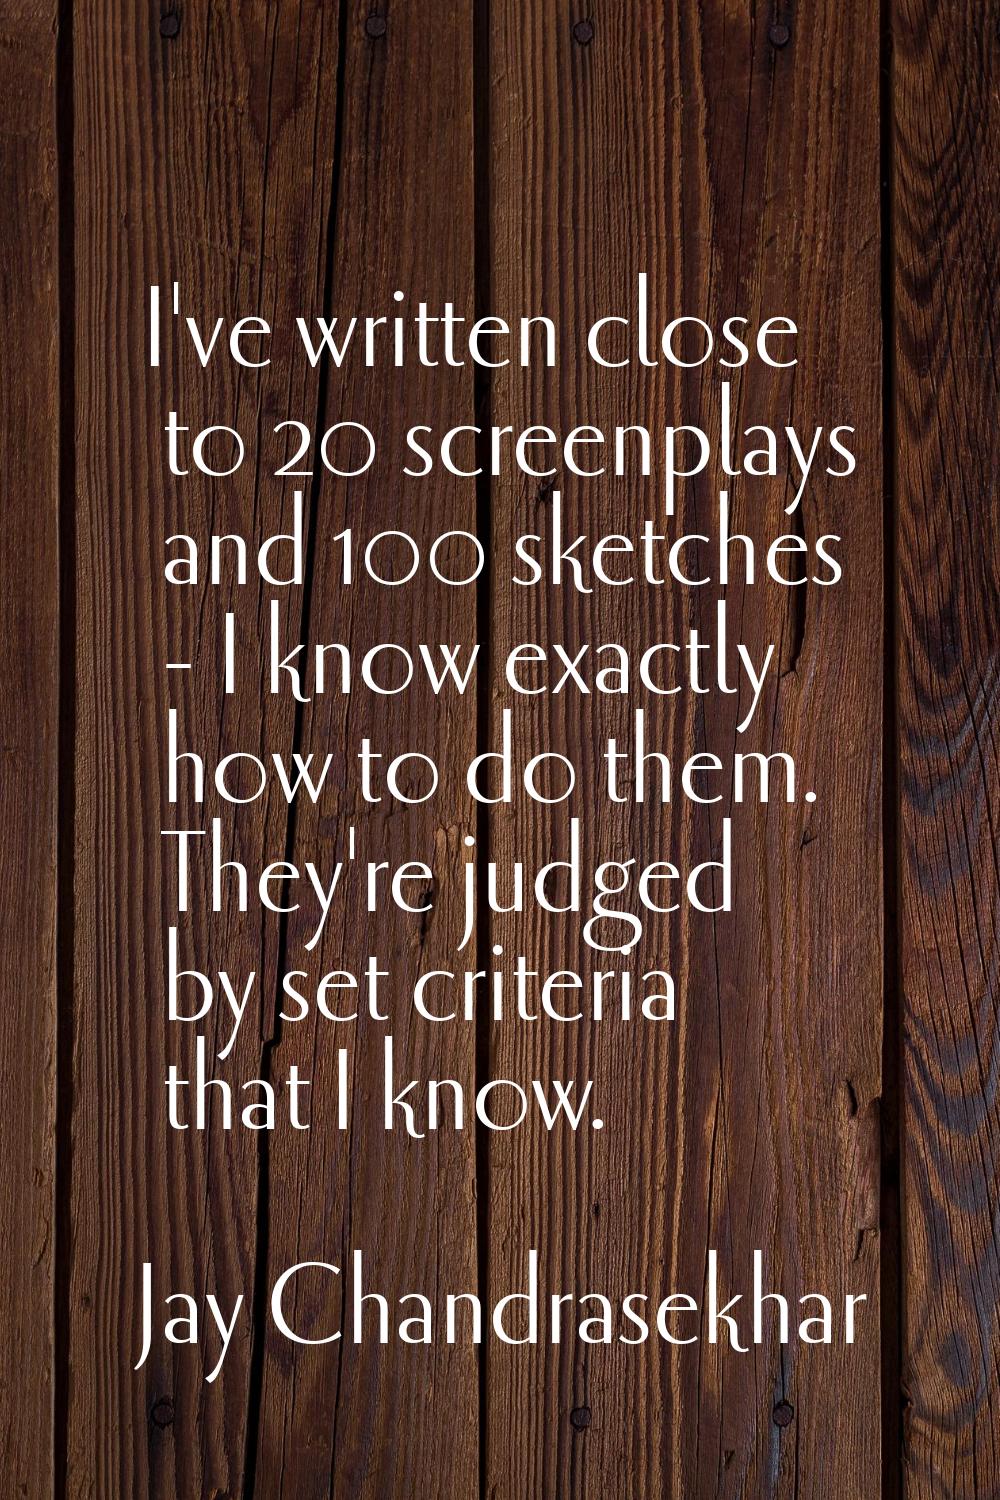 I've written close to 20 screenplays and 100 sketches - I know exactly how to do them. They're judg